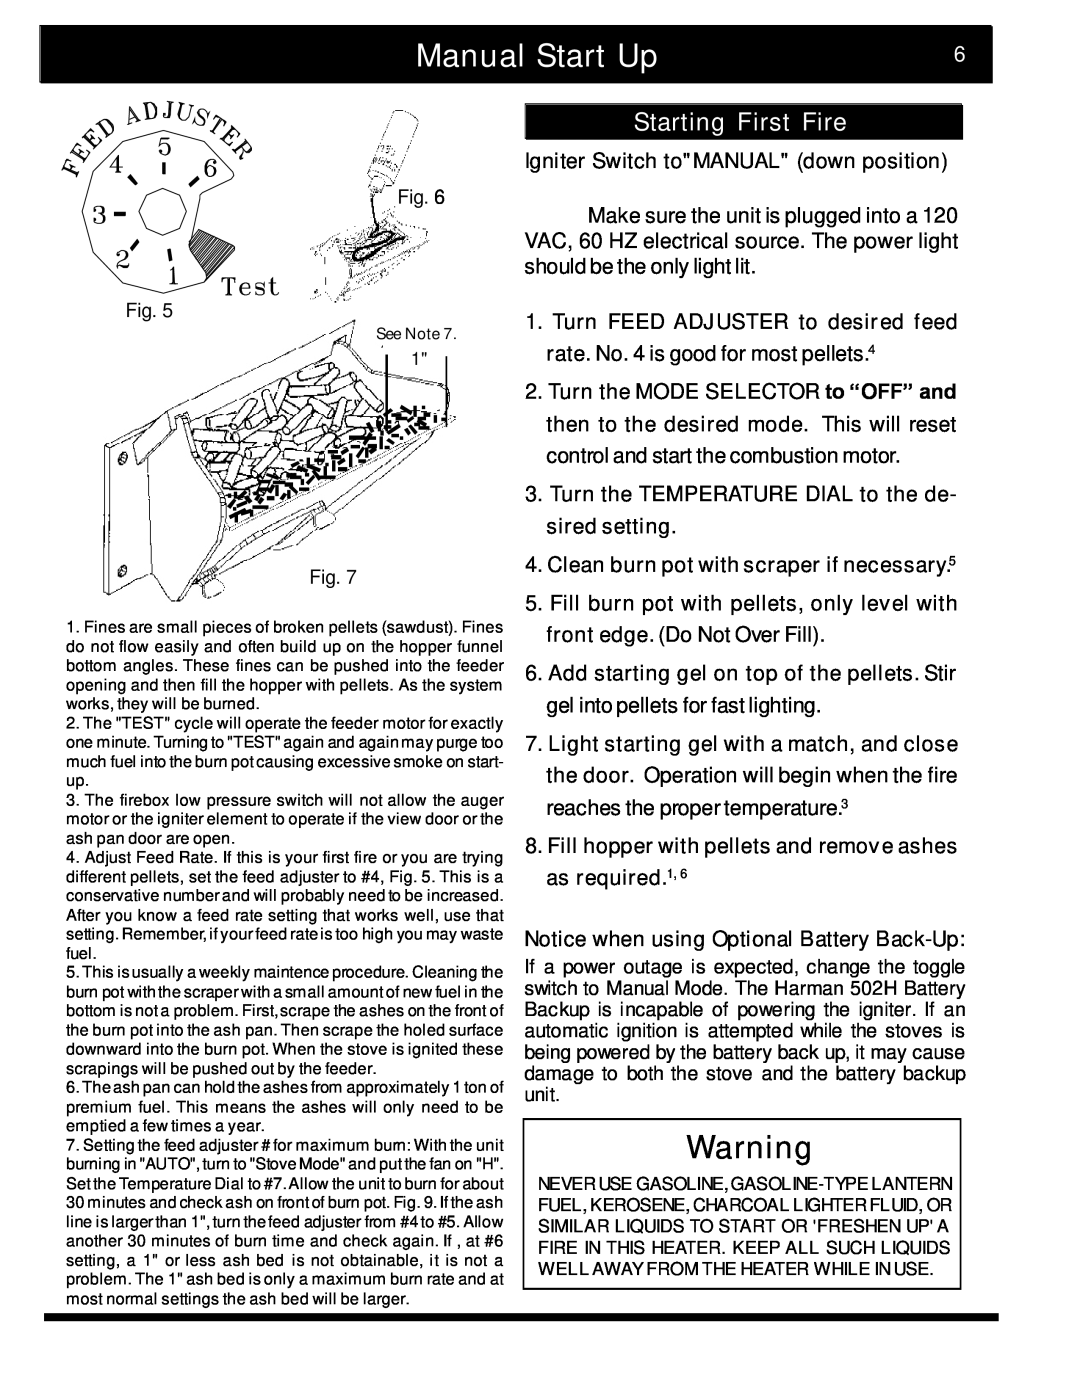 Harman Stove Company The Harman Accentra Pellet Insert manual Manual Start Up, Starting First Fire 